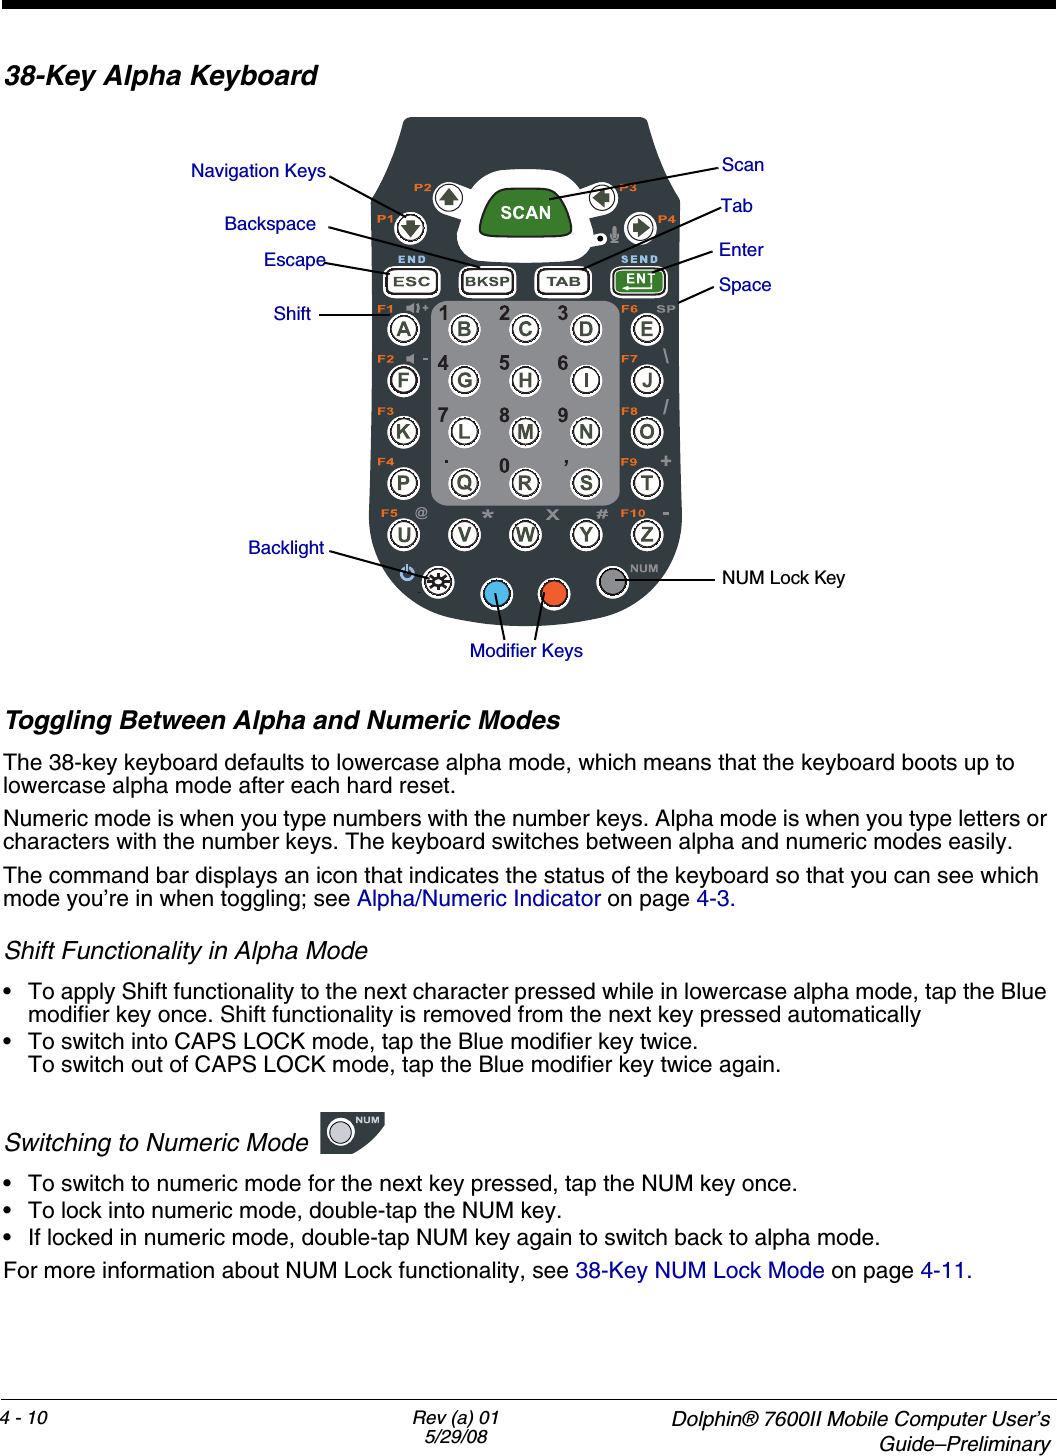 4 - 10 Rev (a) 015/29/08  Dolphin® 7600II Mobile Computer User’sGuide–Preliminary38-Key Alpha KeyboardToggling Between Alpha and Numeric ModesThe 38-key keyboard defaults to lowercase alpha mode, which means that the keyboard boots up to lowercase alpha mode after each hard reset.Numeric mode is when you type numbers with the number keys. Alpha mode is when you type letters or characters with the number keys. The keyboard switches between alpha and numeric modes easily. The command bar displays an icon that indicates the status of the keyboard so that you can see which mode you’re in when toggling; see Alpha/Numeric Indicator on page 4-3.Shift Functionality in Alpha Mode• To apply Shift functionality to the next character pressed while in lowercase alpha mode, tap the Blue modifier key once. Shift functionality is removed from the next key pressed automatically• To switch into CAPS LOCK mode, tap the Blue modifier key twice. To switch out of CAPS LOCK mode, tap the Blue modifier key twice again.Switching to Numeric Mode• To switch to numeric mode for the next key pressed, tap the NUM key once. • To lock into numeric mode, double-tap the NUM key. • If locked in numeric mode, double-tap NUM key again to switch back to alpha mode.For more information about NUM Lock functionality, see 38-Key NUM Lock Mode on page 4-11.BacklightModifier KeysEscapeNavigation KeysTab ShiftEnterScanBackspaceSpaceNUM Lock Key